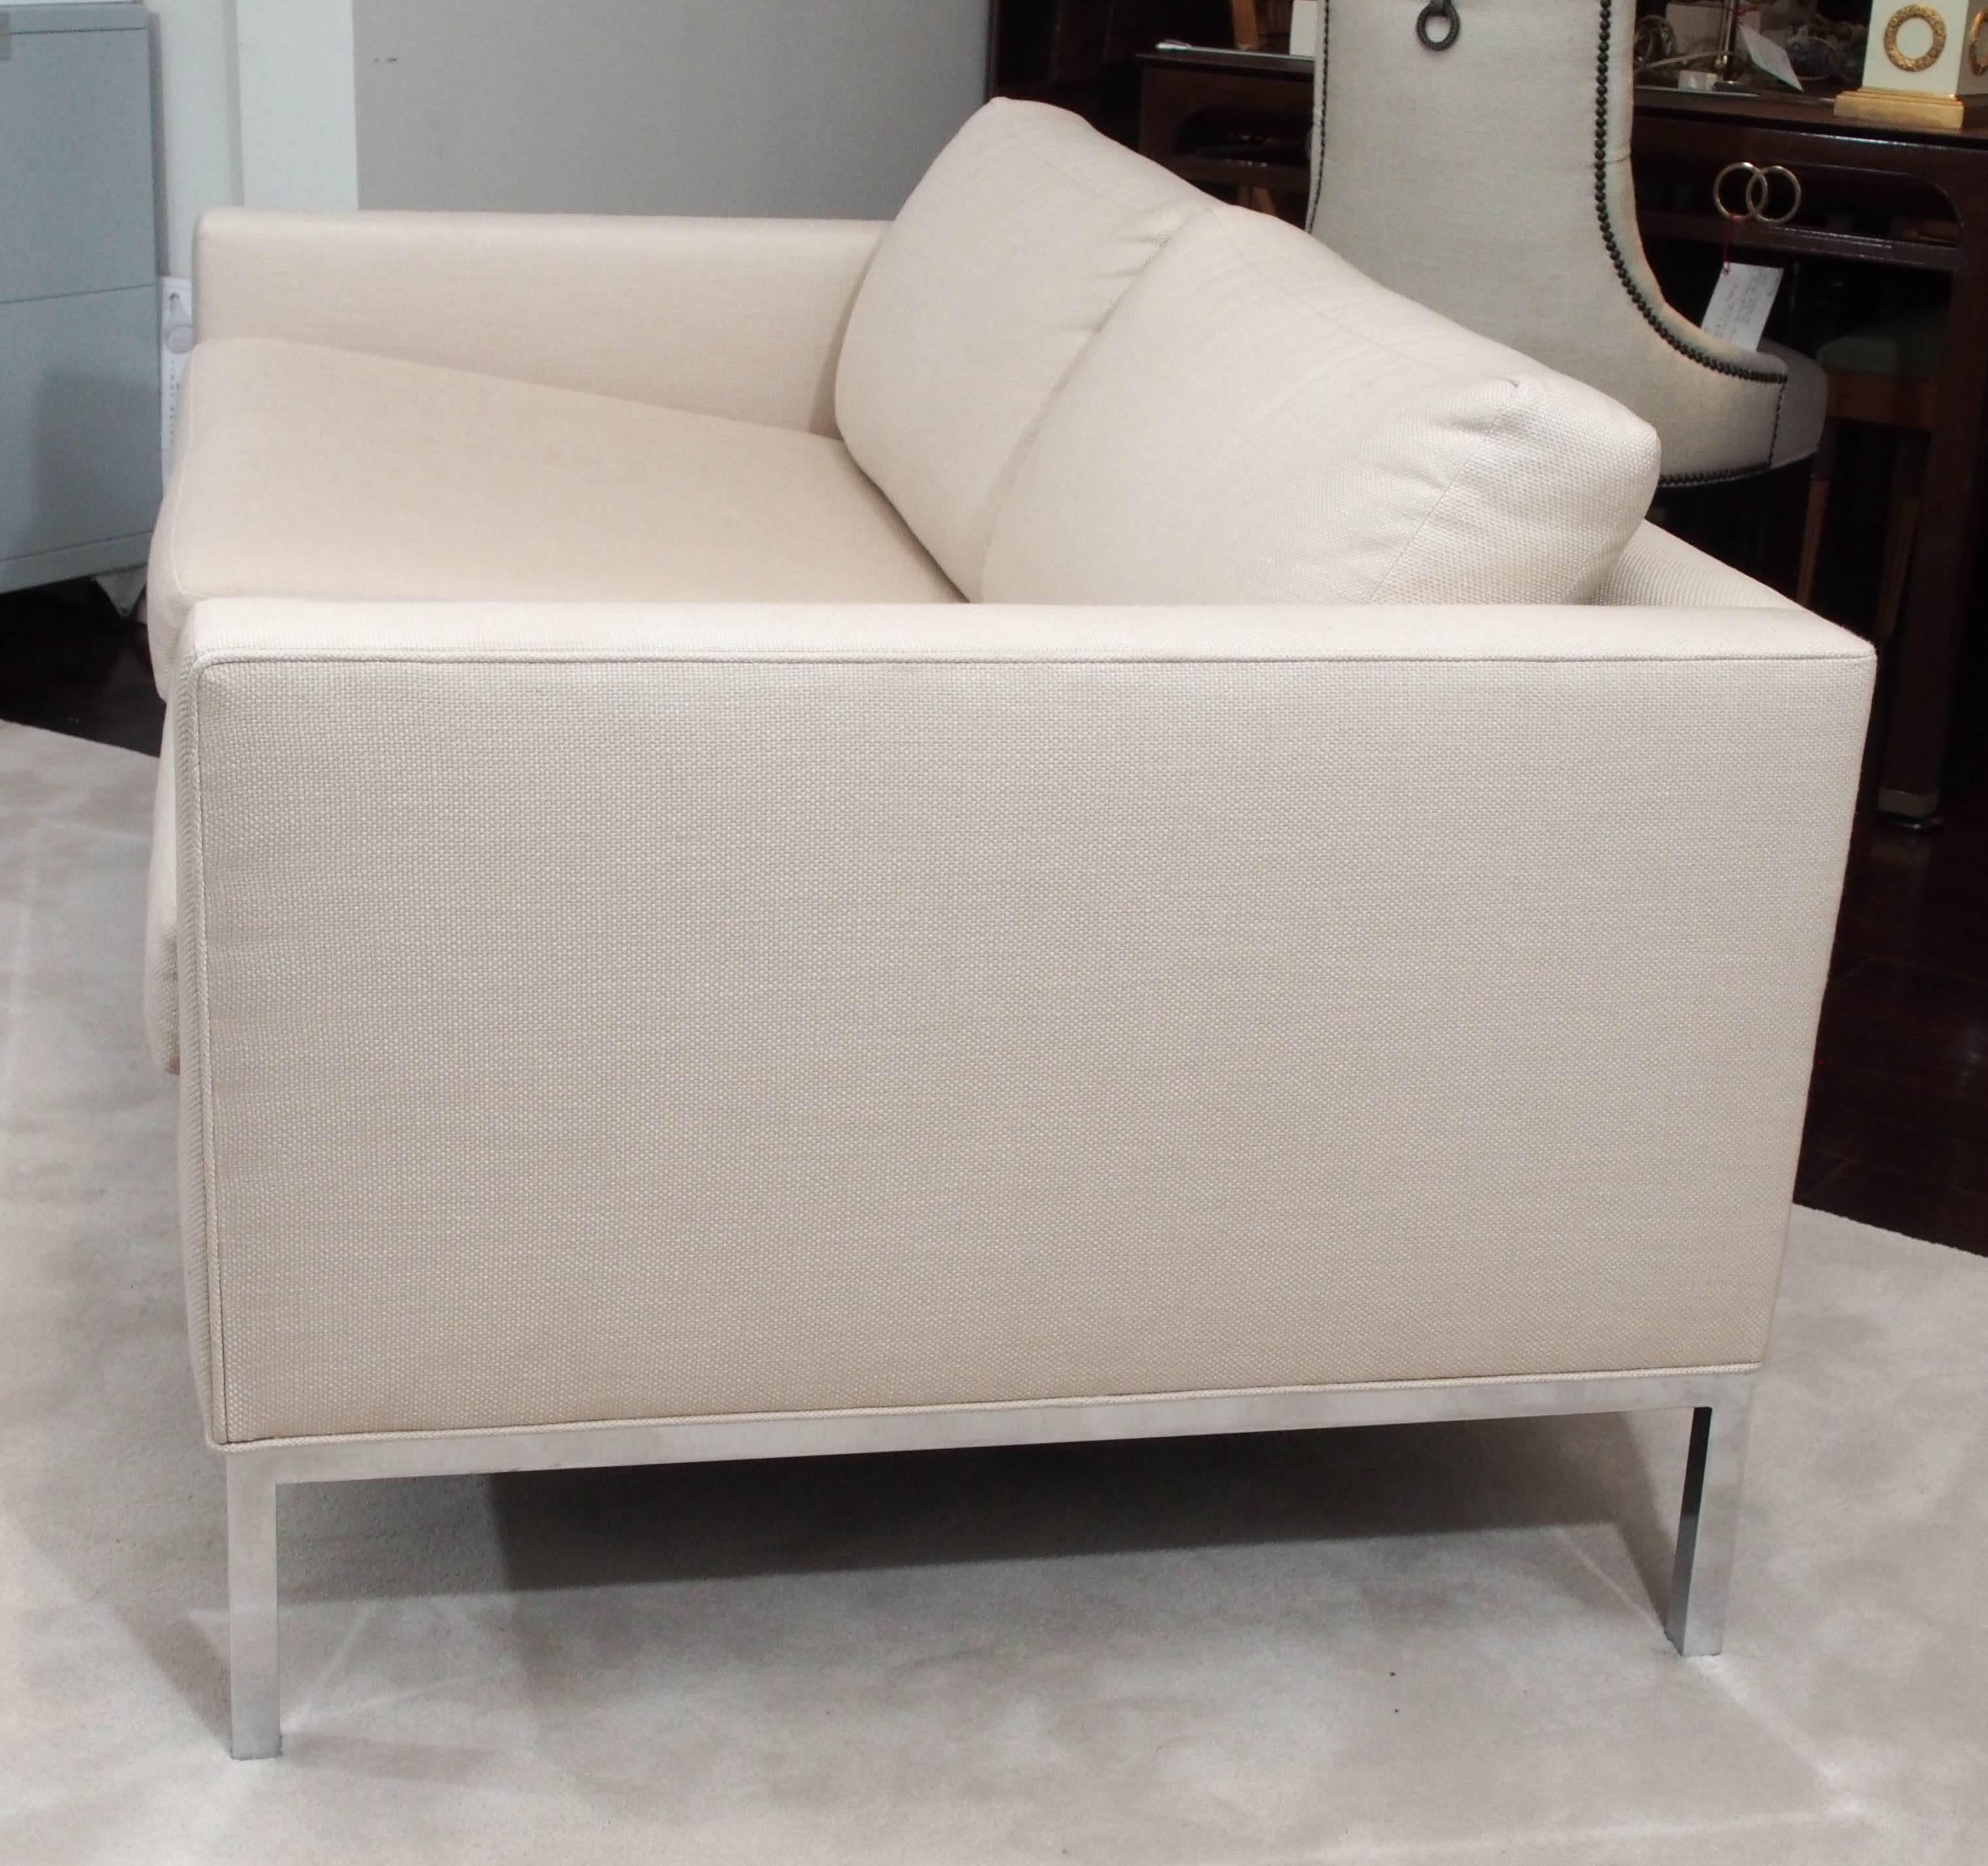 Knoll Style Two-Seat Upholstered Sofa In Excellent Condition For Sale In New Orleans, LA